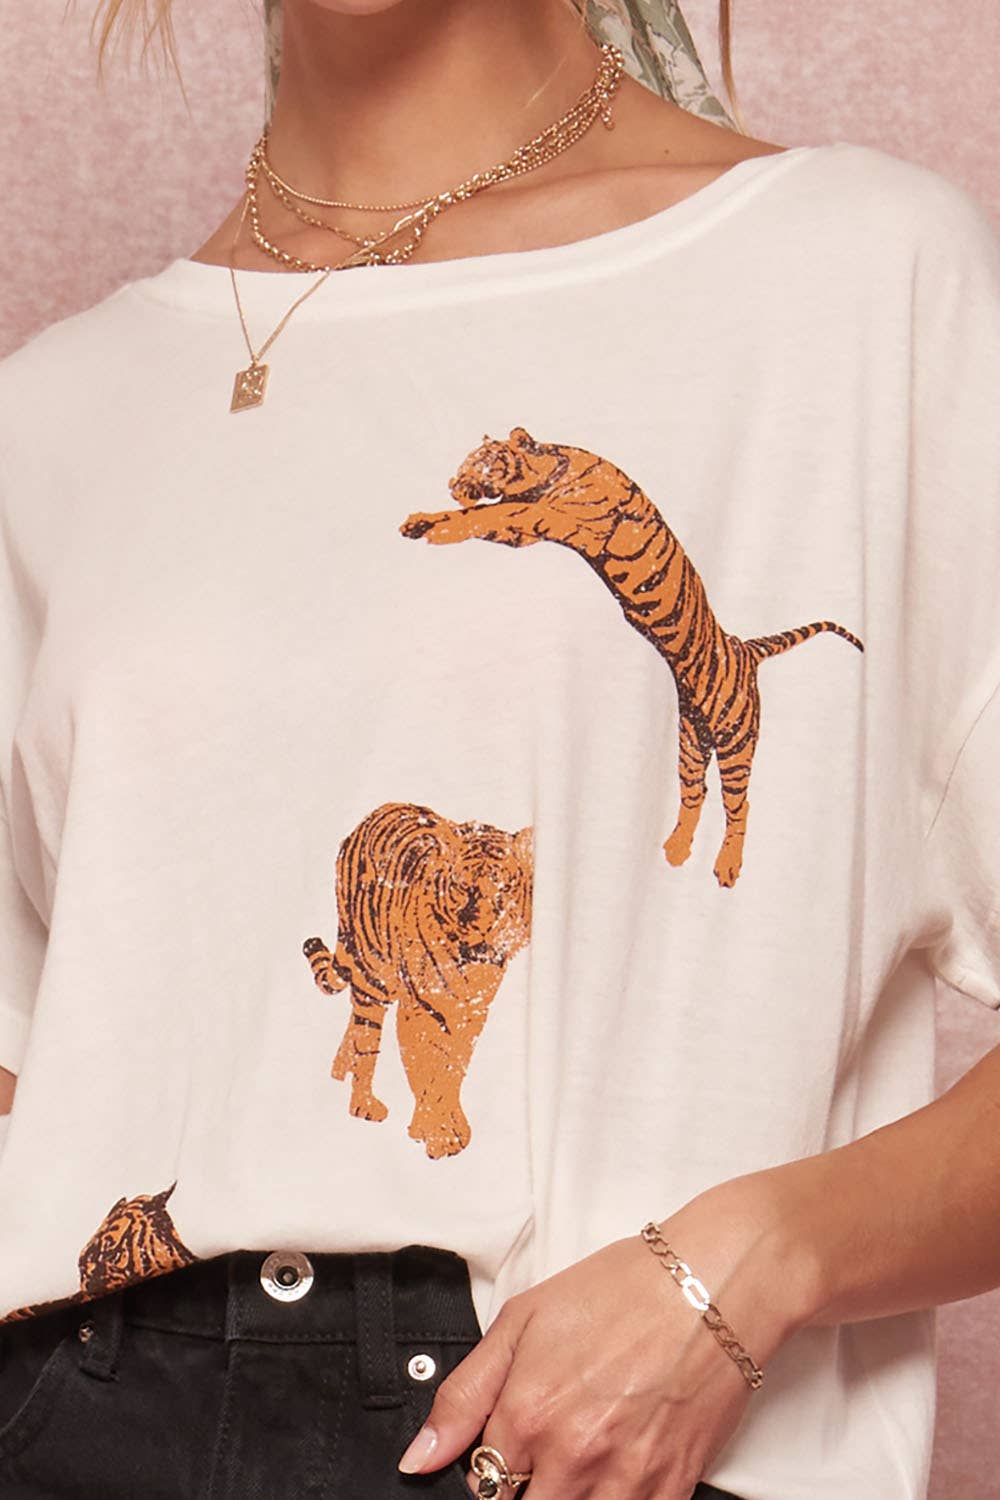 Tiger Vintage Garment Washed Graphic Tee - Graphic Tee